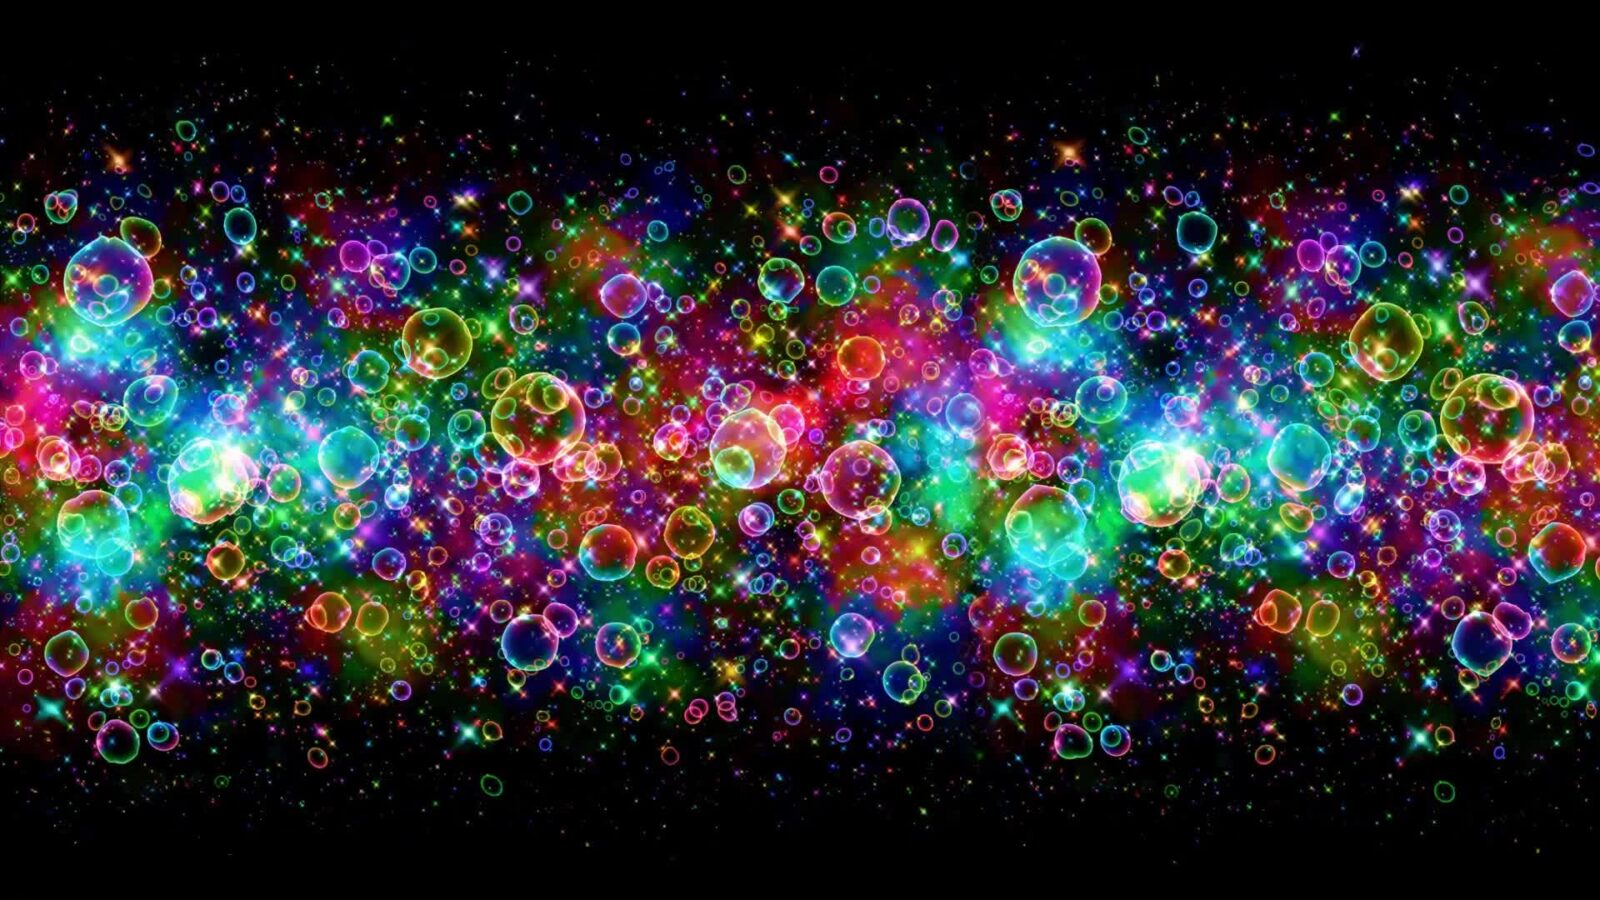 LiveWallpapers4Free.com | Fantasy Colorful Water Bubbles Abstract - Free Live Wallpaper